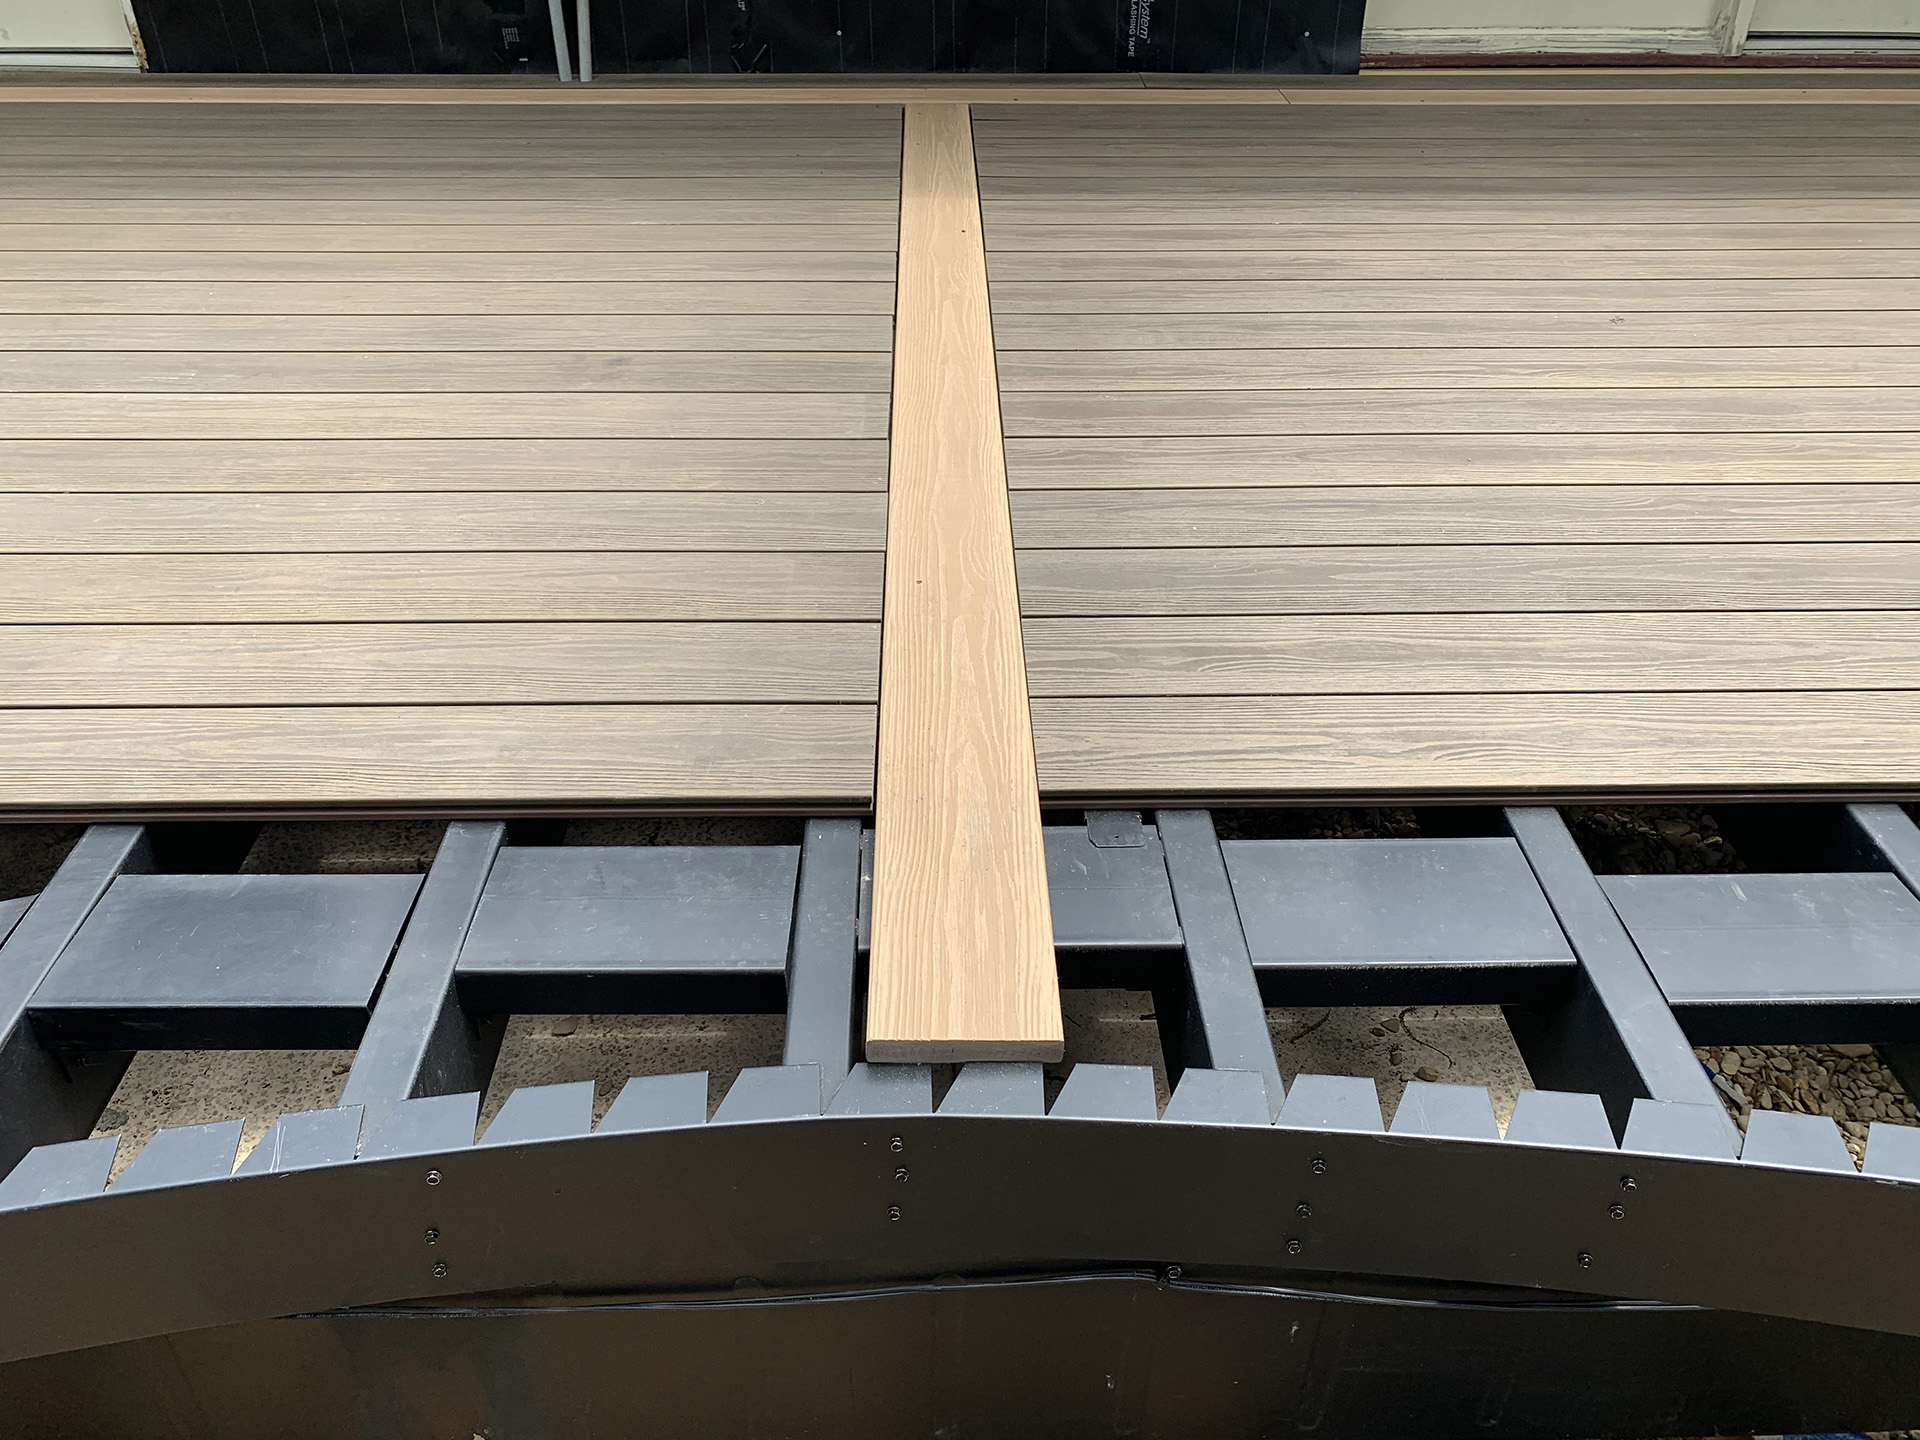 Curved deck frame with composite deck boards installed on the surface.